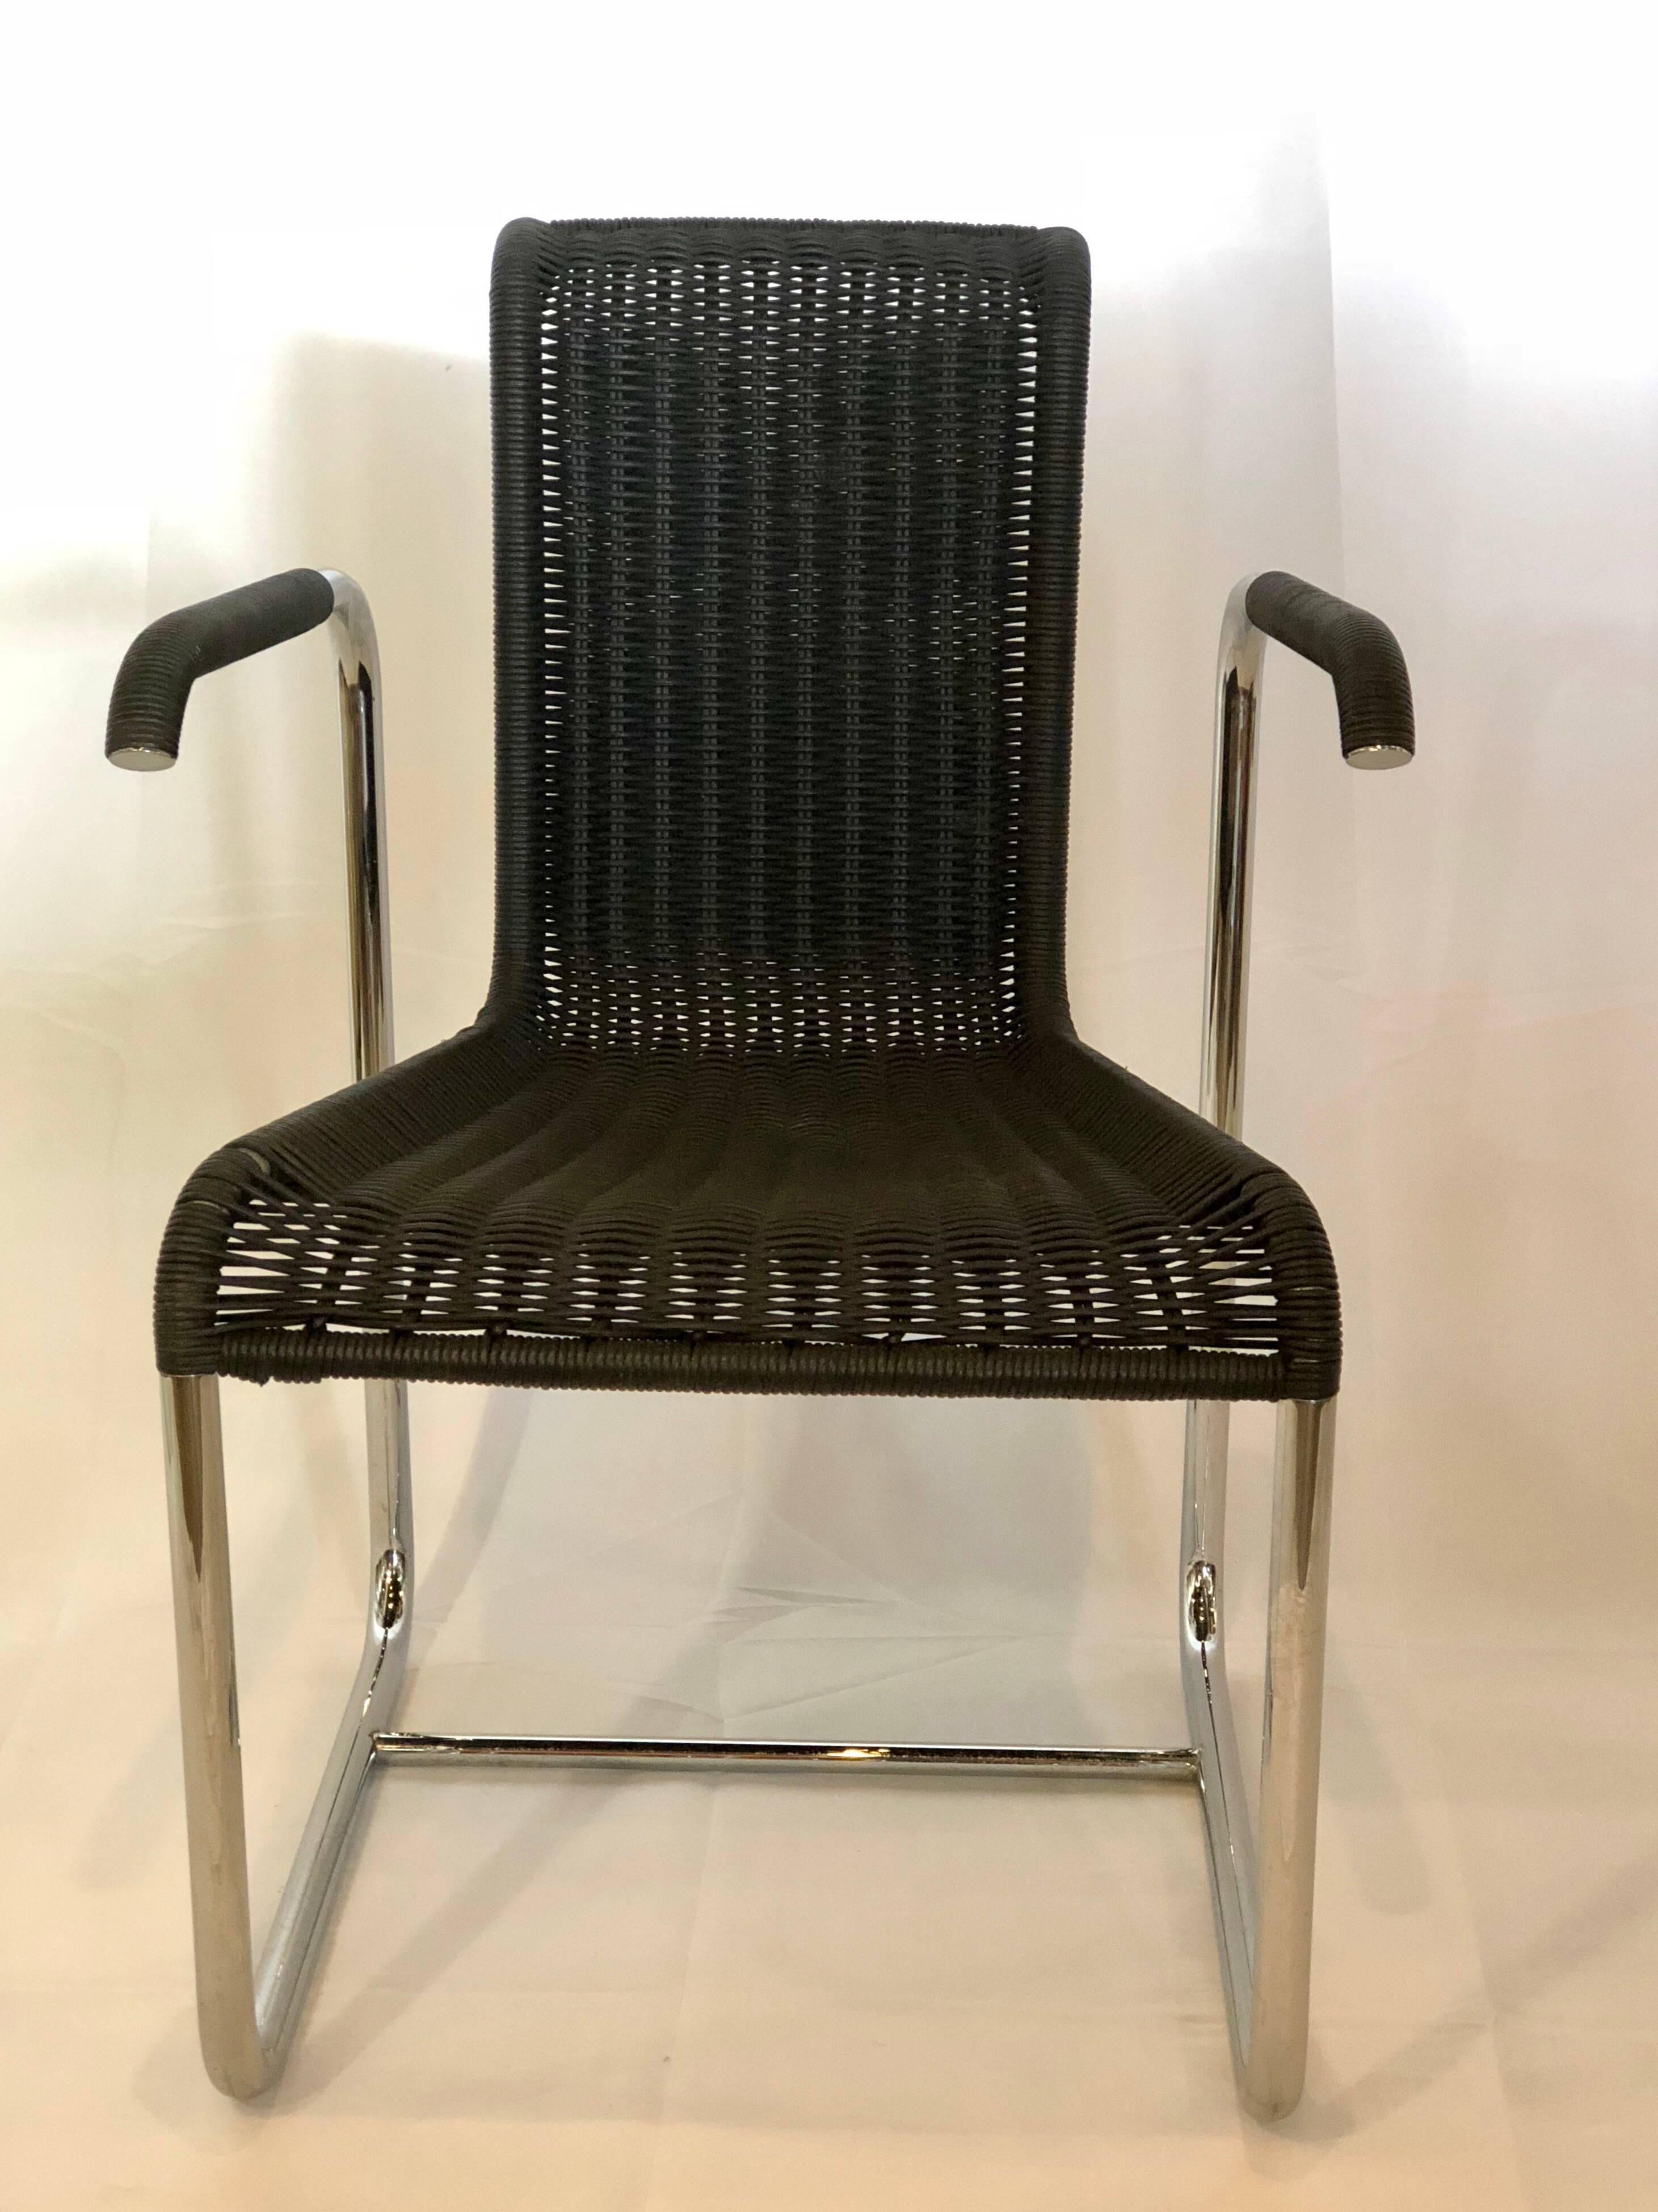 Thank you for looking at my Jean Prouvé D20 stainless steel leather wicker chair that has been reproduced by Tecta who is a Furniture Company based in Germany. Beautifully made and very comfortable this black leather hand-braided wicker is a perfect